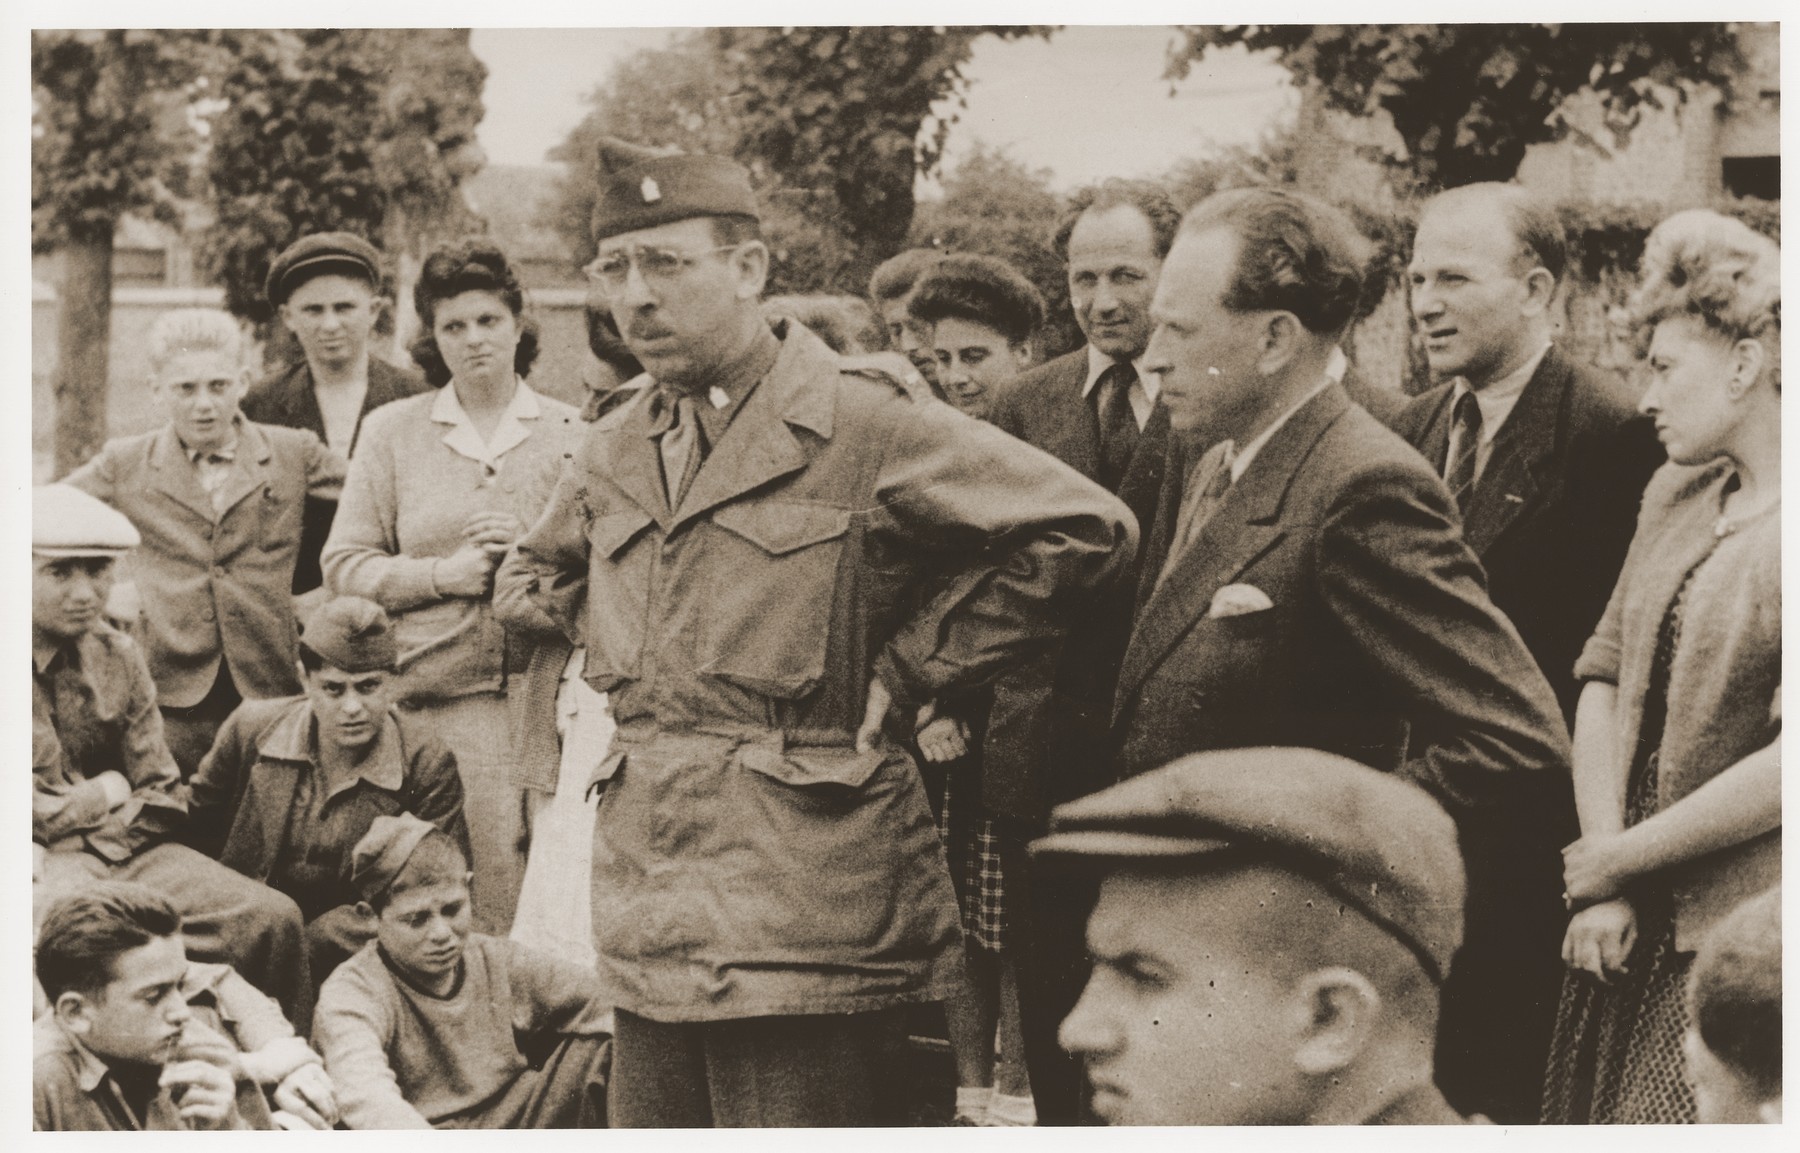 US Army Chaplain Rabbi Morris Dembowitz meets with members of the Buchenwald children's transport outside the Ecouis children's home. 

Among those pictured is Hans Oster (second row of children from the bottom, second from the left).